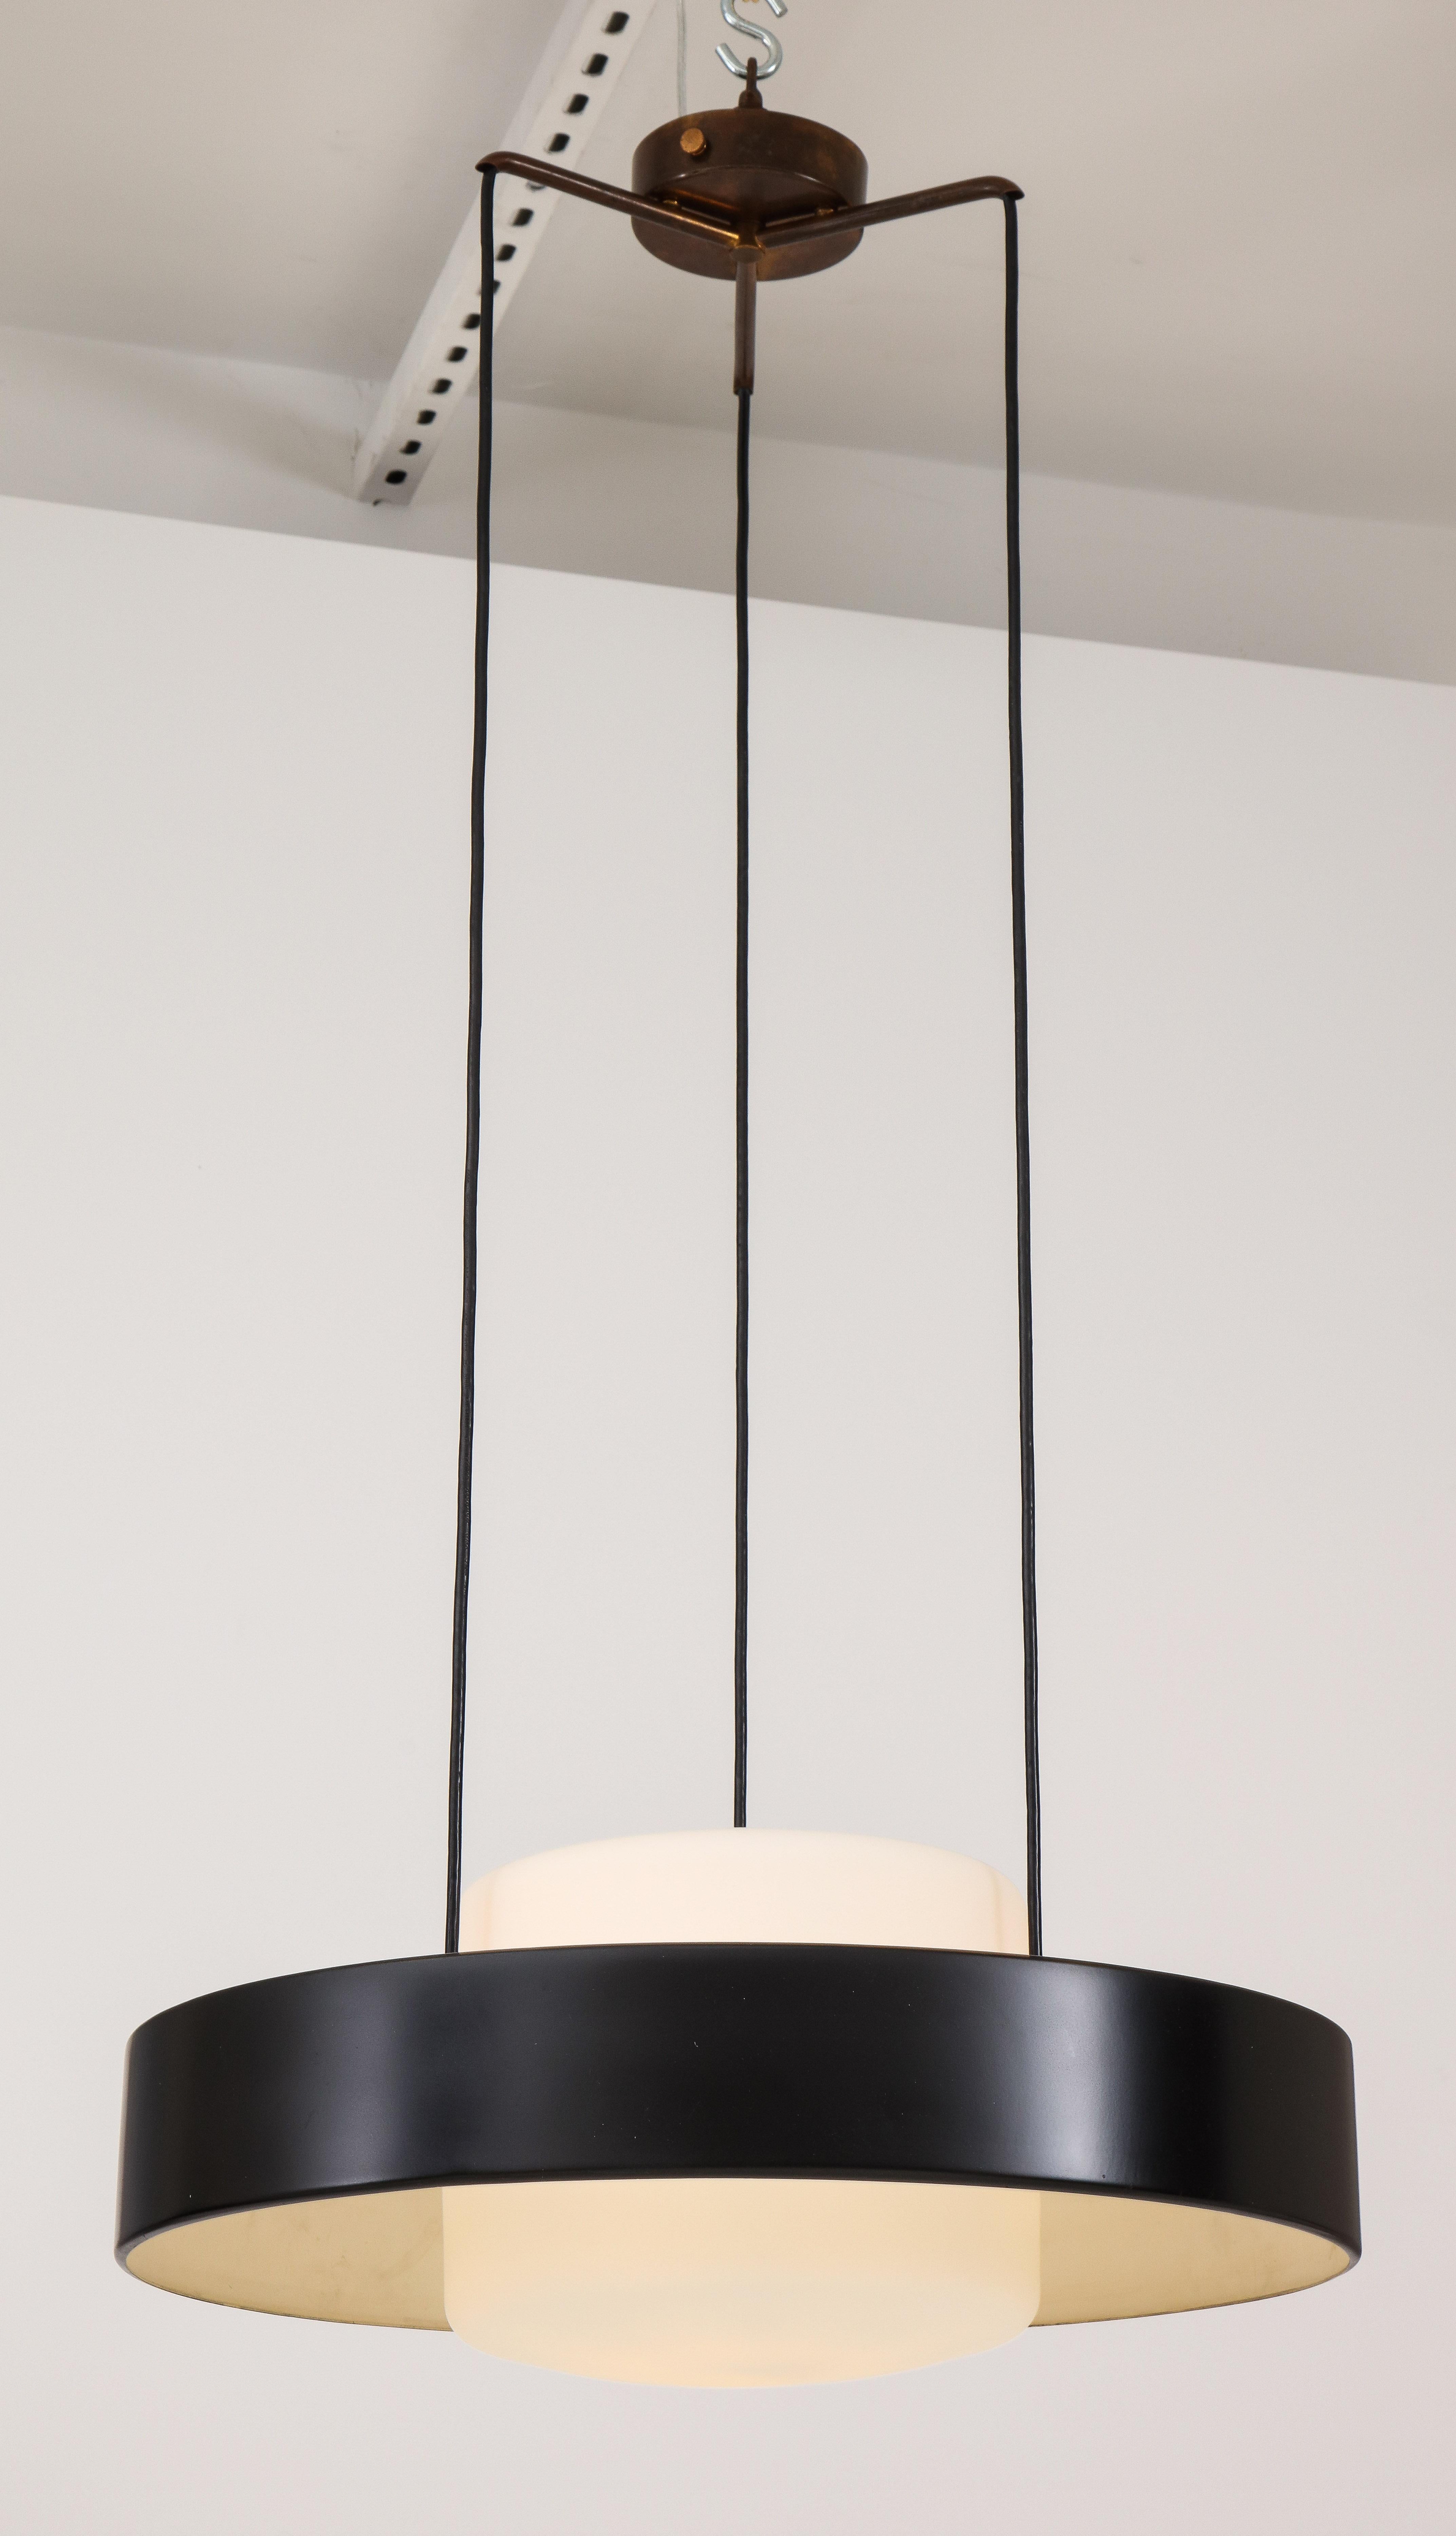 Stilnovo iconic chandelier model 1158 composed of black enameled metal ring and opaque glass shades suspended from original brass canopy and structure, Italy, 1960s. This adjustable ceiling light emits light beautifully with its opaque glass shades